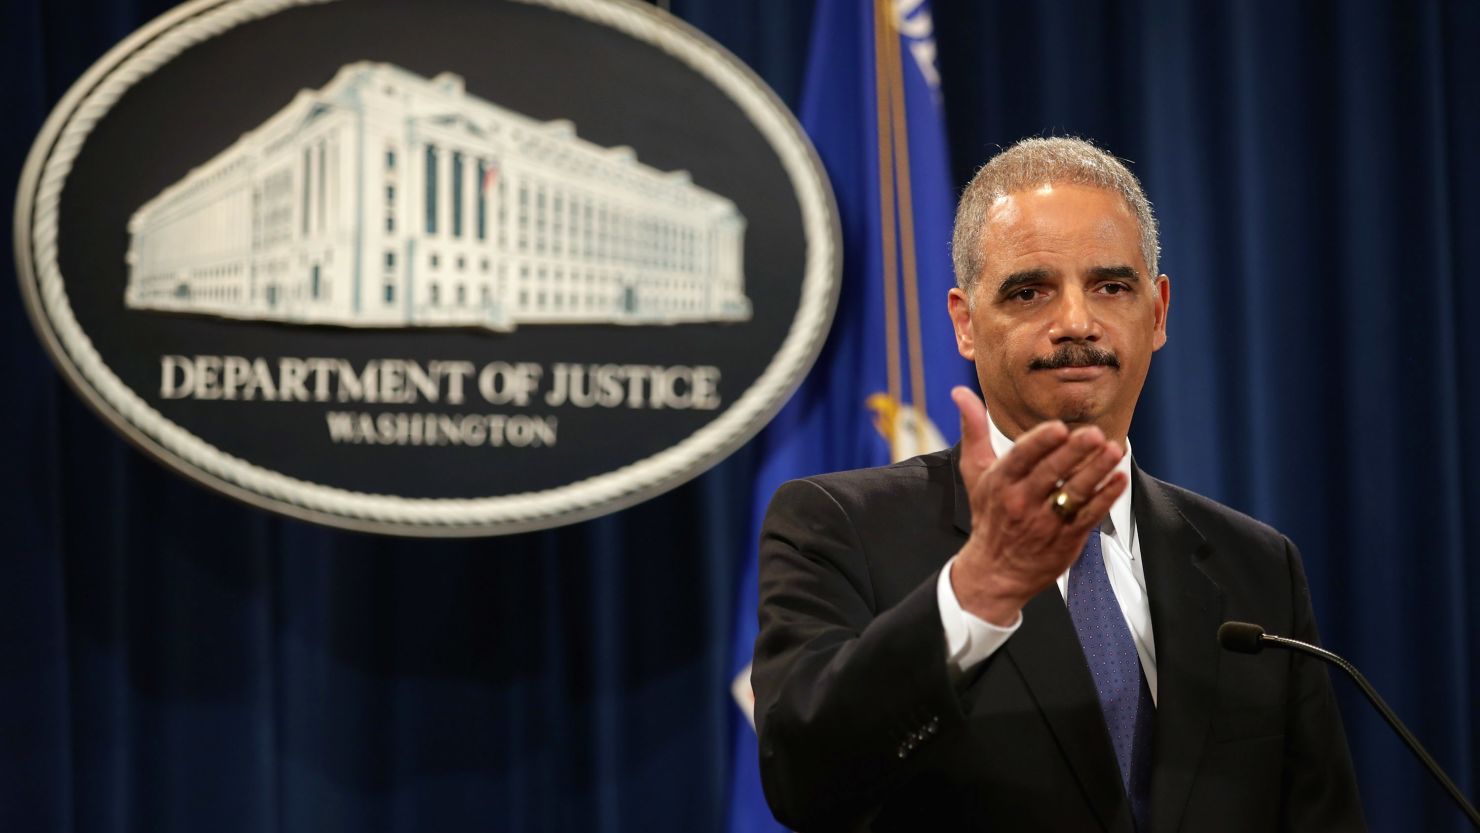 "We can -- and we must -- do even more" to combat homegrown terror groups, U.S. Attorney General Eric Holder says.